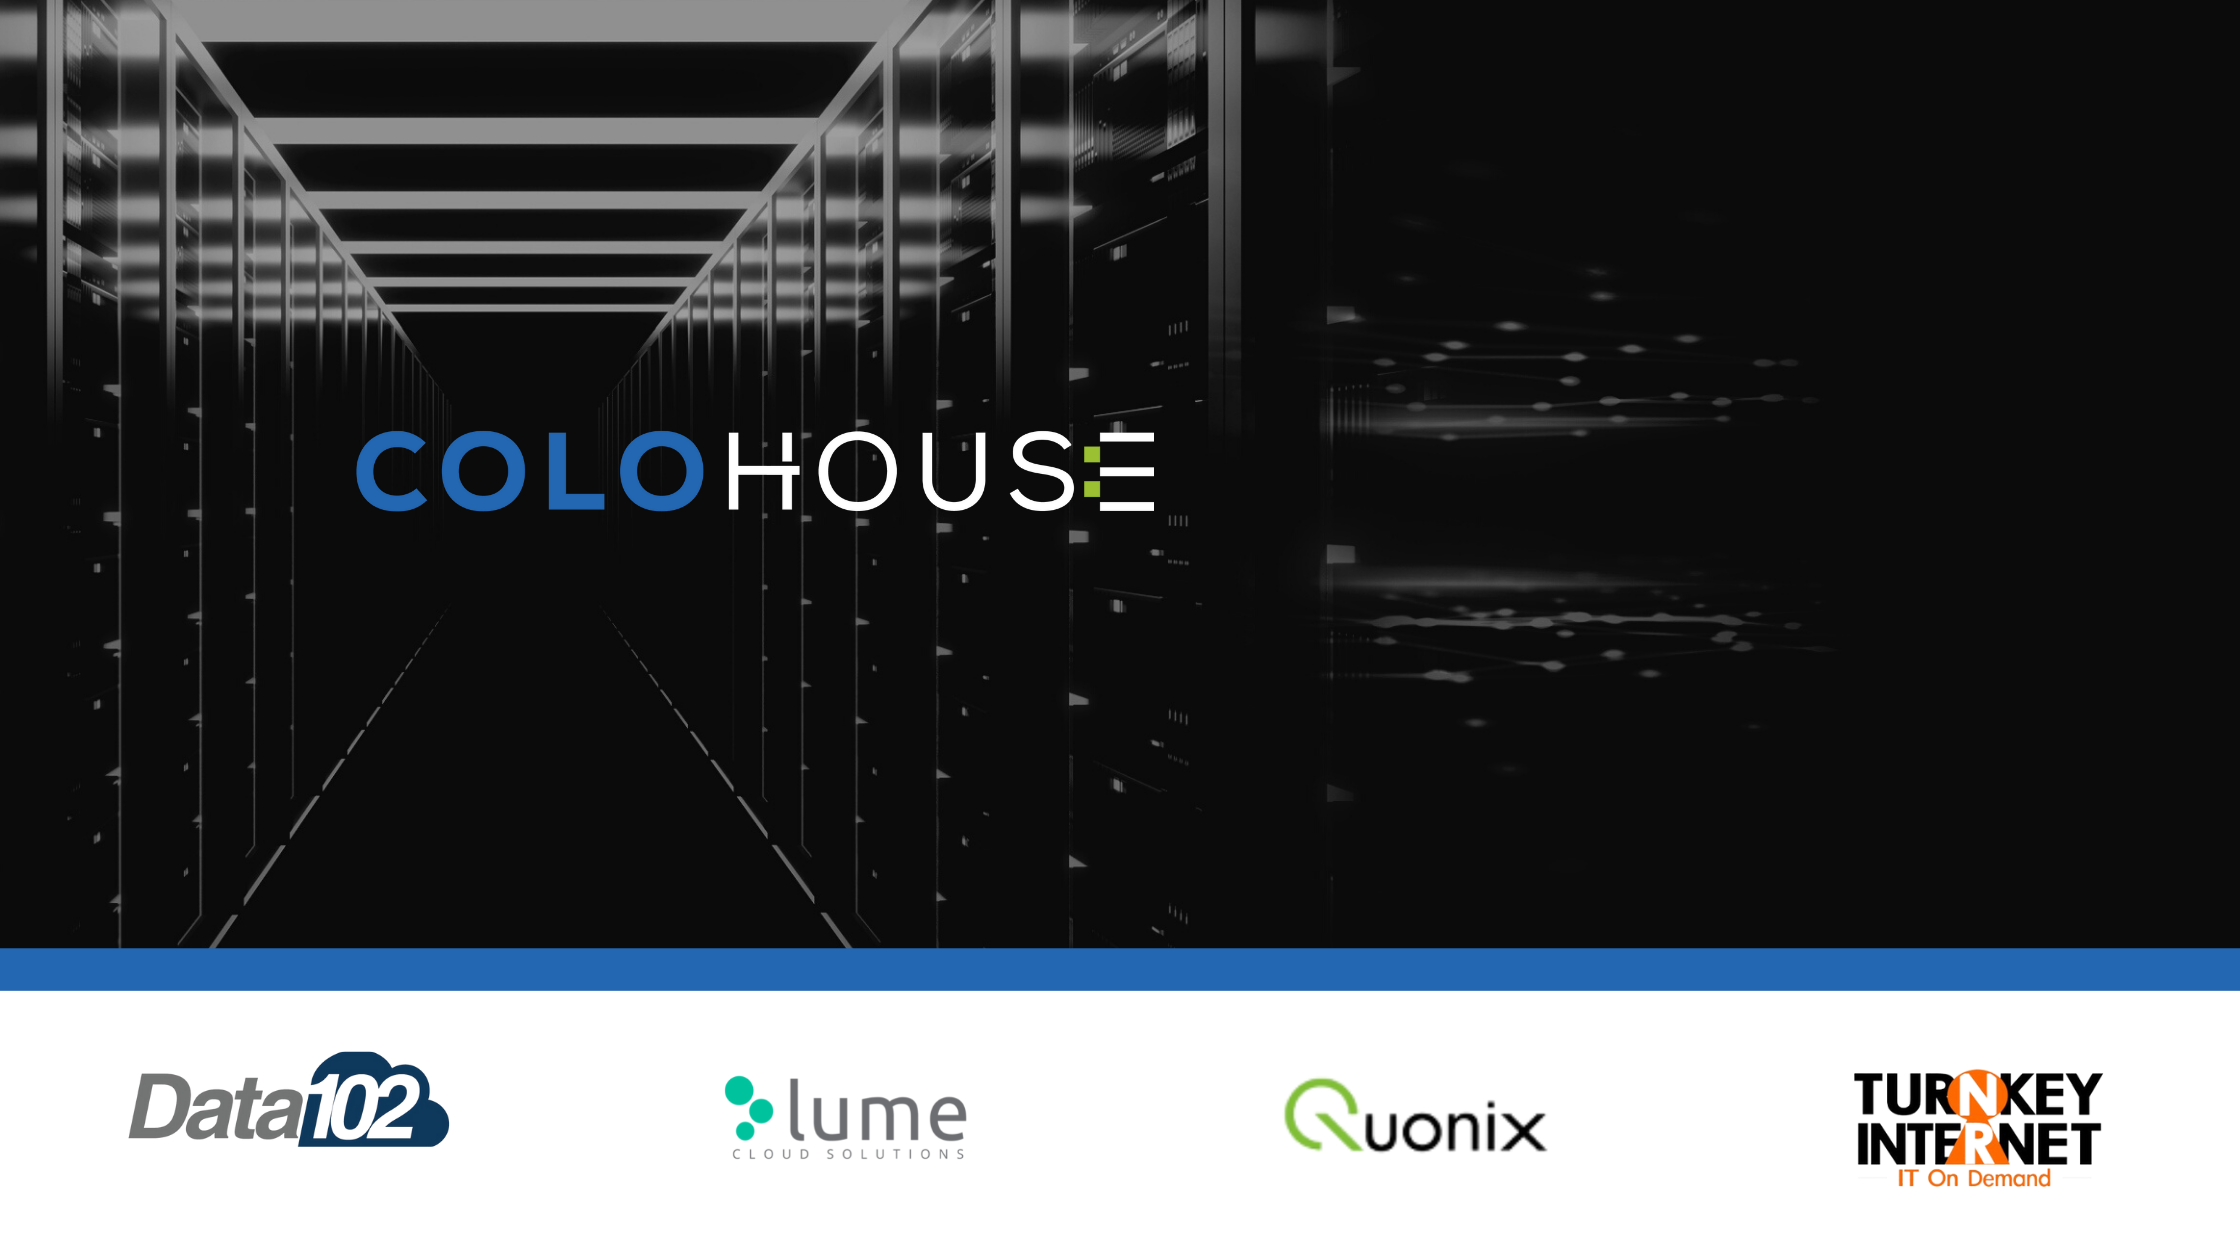 ColoHouse Continues Acquisition Strategy with Purchase of Quonix, Data102 and Turnkey Internet